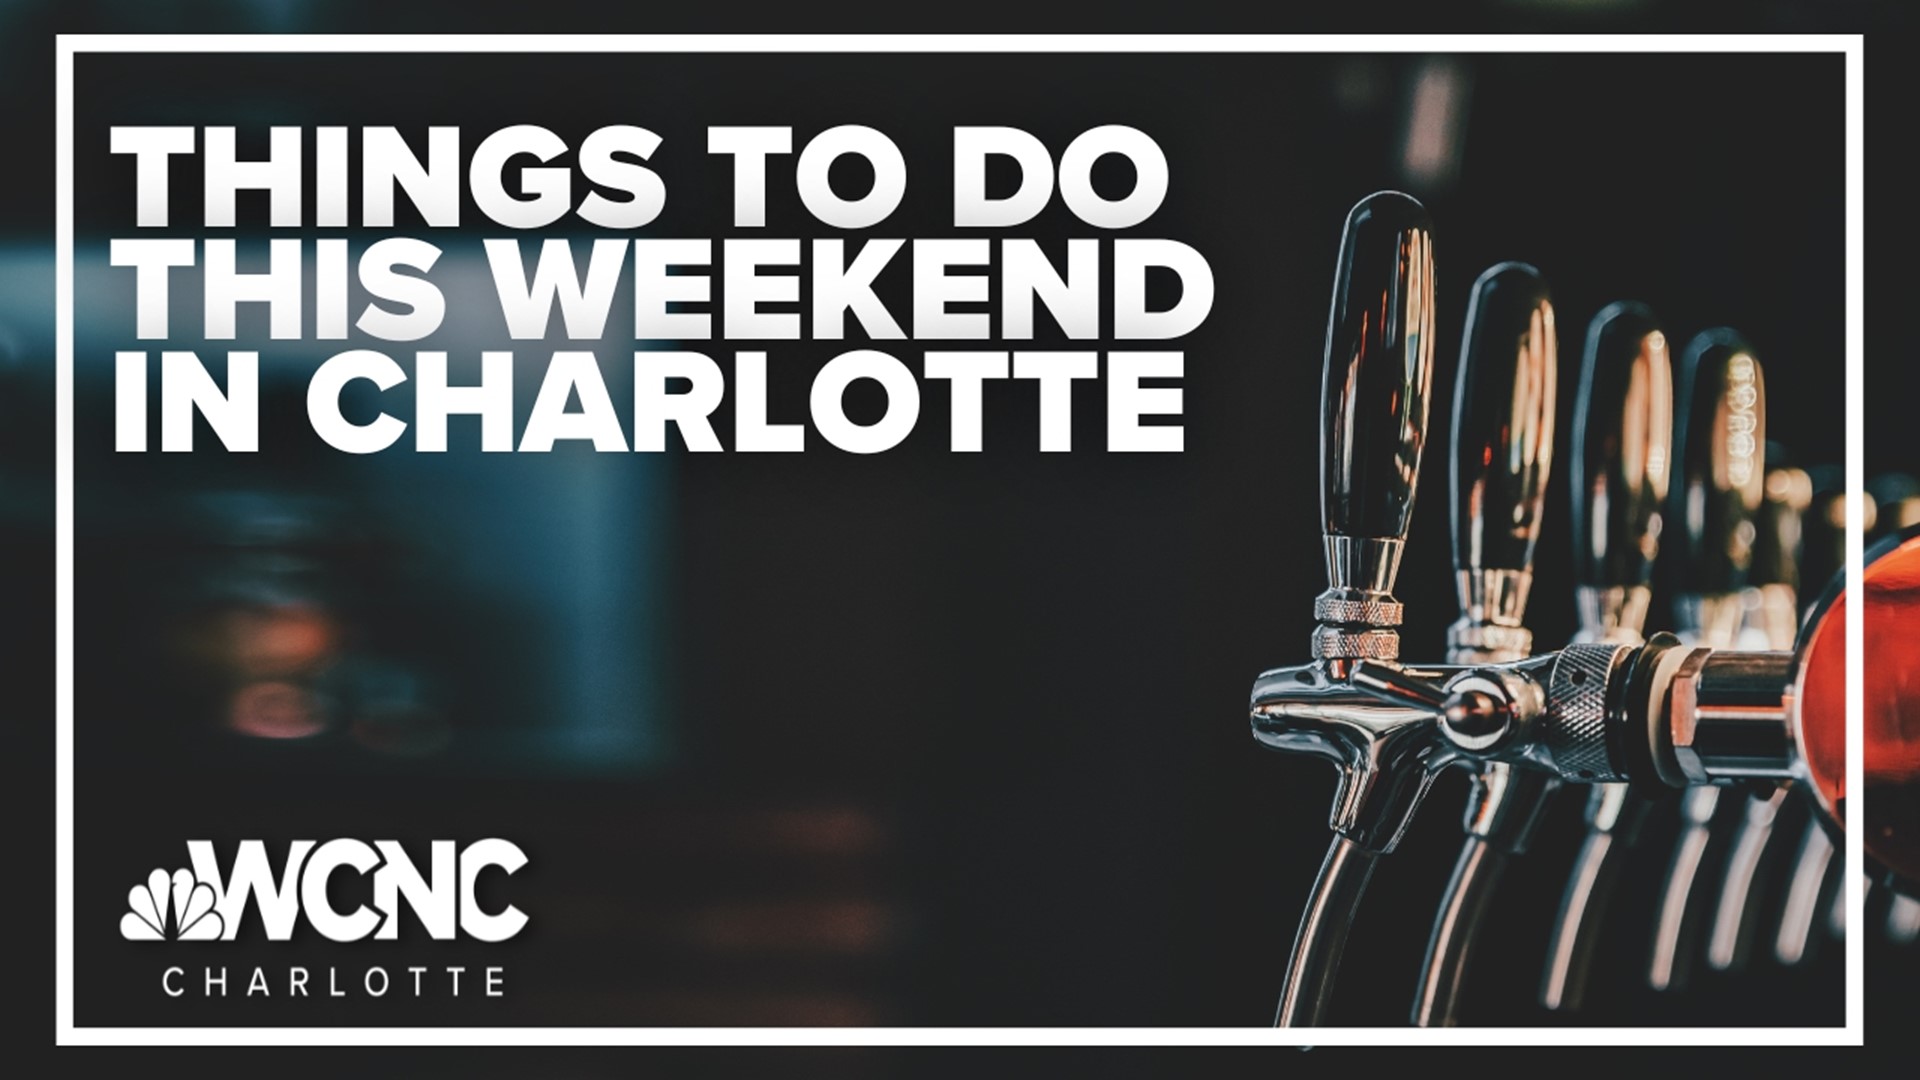 Enjoy the return of the Panthers and Charlotte FC, as well as cultural festivals, and more in the Queen City this weekend. See what's happening!